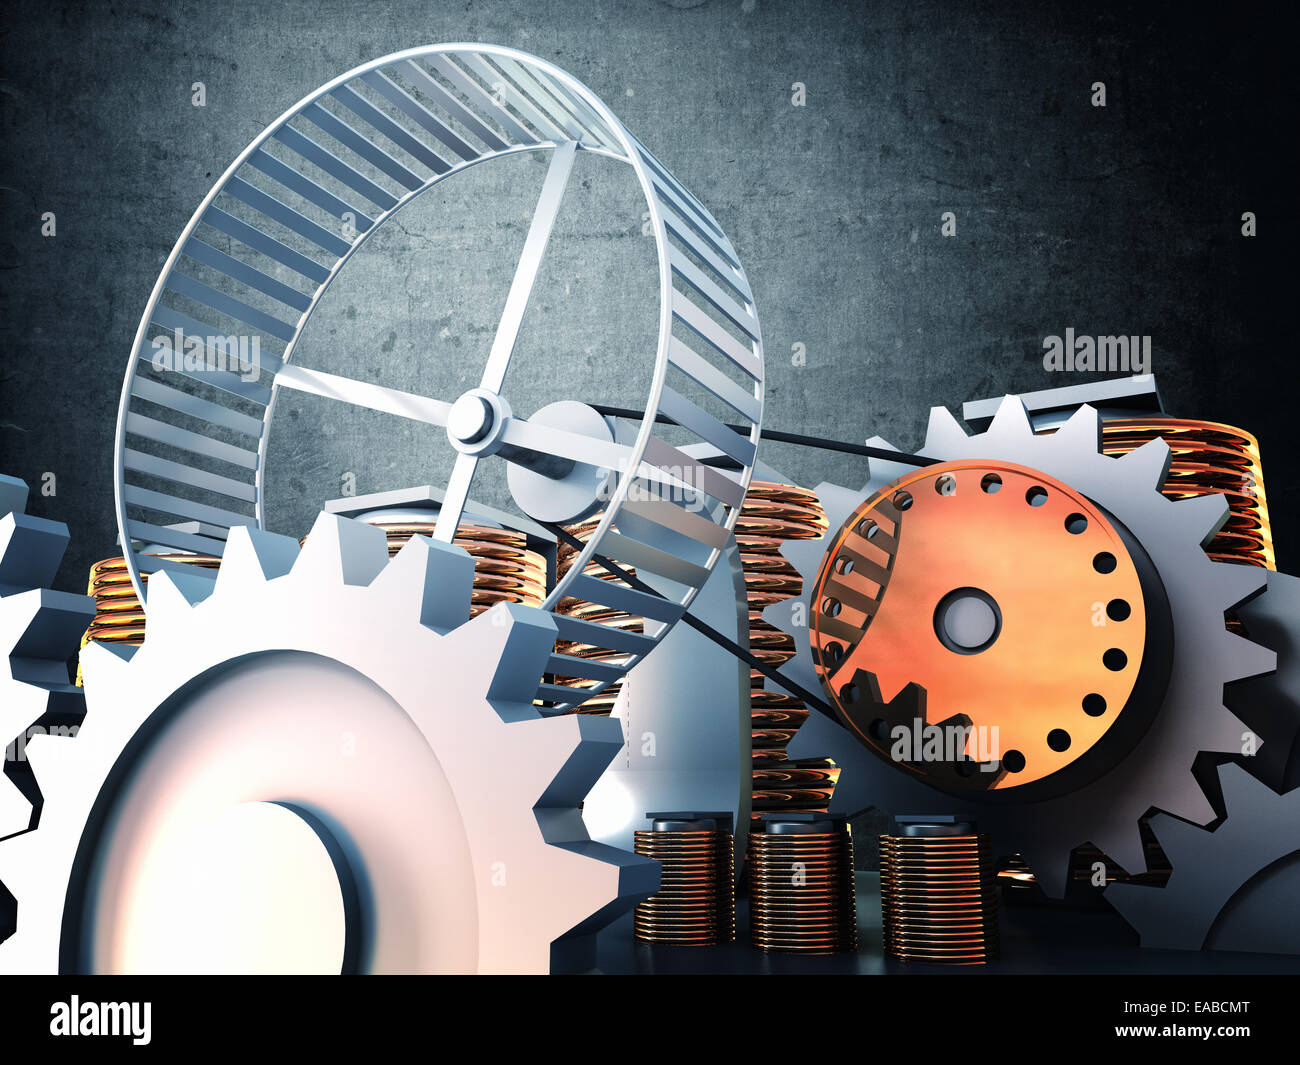 3d image of abstract power generator Stock Photo